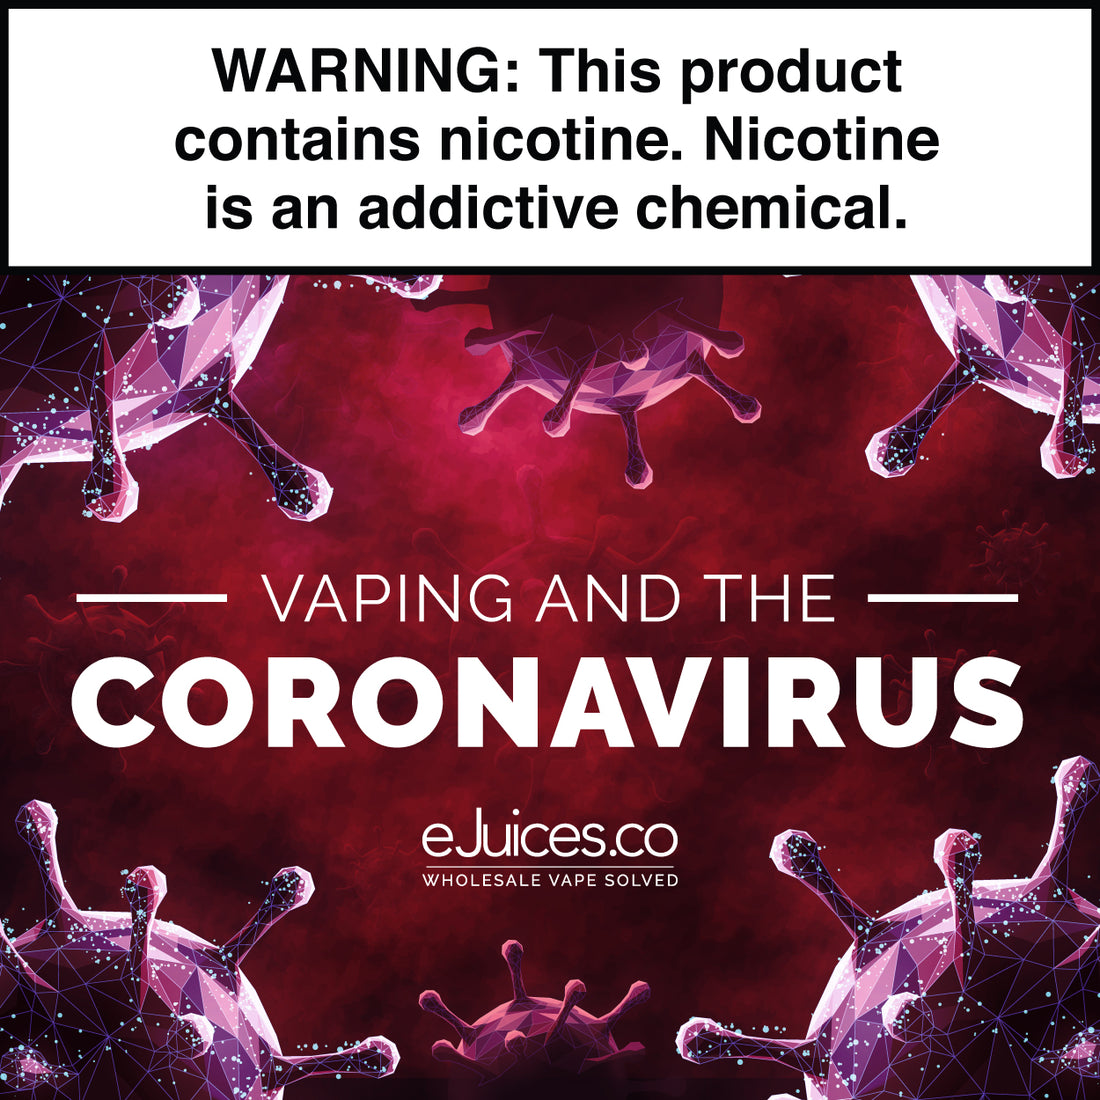 The Coronavirus and Vaping: What Should I Know?